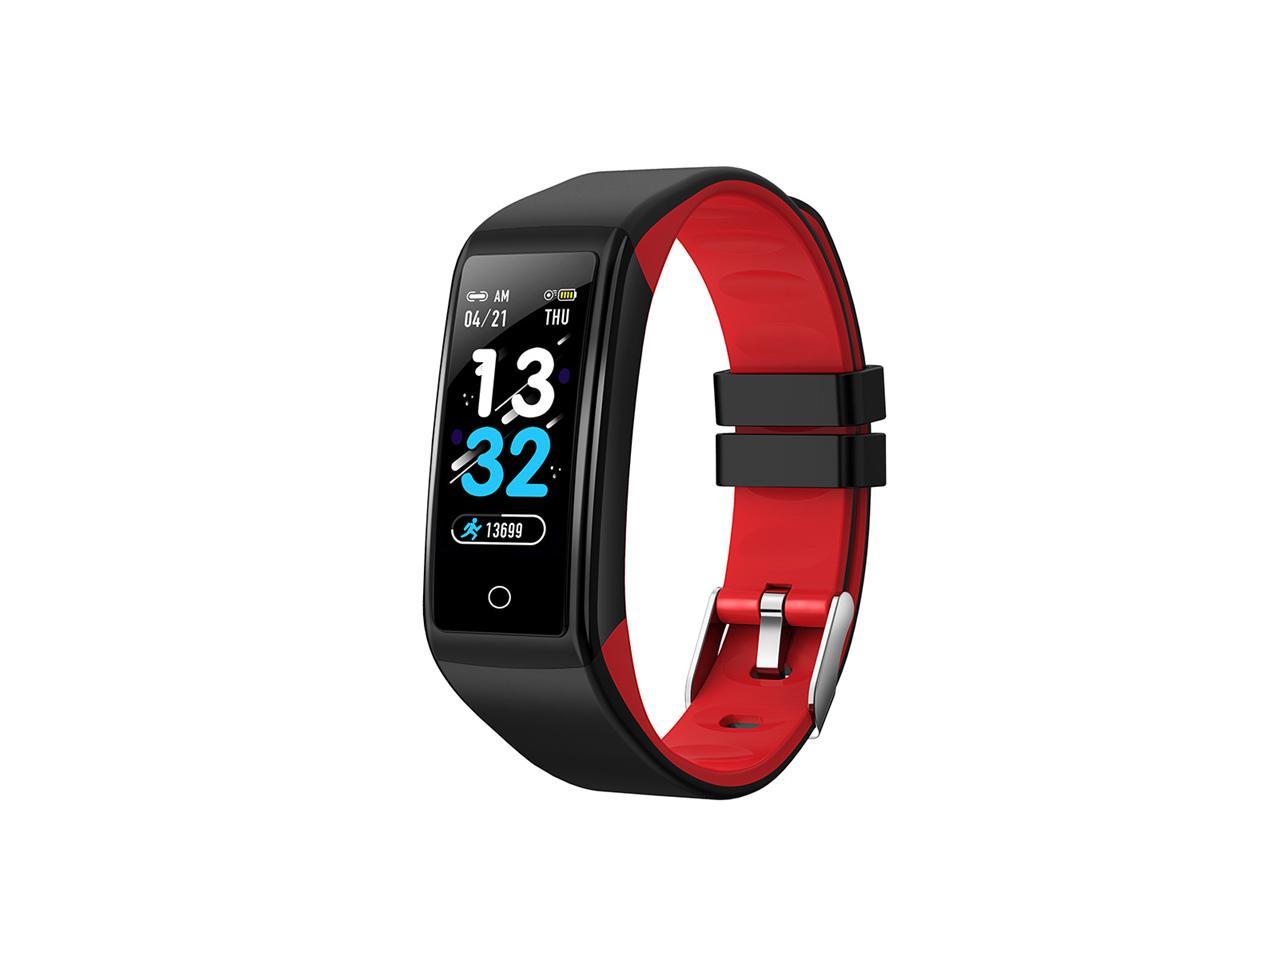 Smart Band Blood Pressure Heart Rate Monitor 0.96 inch TFT HD color screen IP67 Waterproof Bracelet for Android iOS (Color: Black Red)